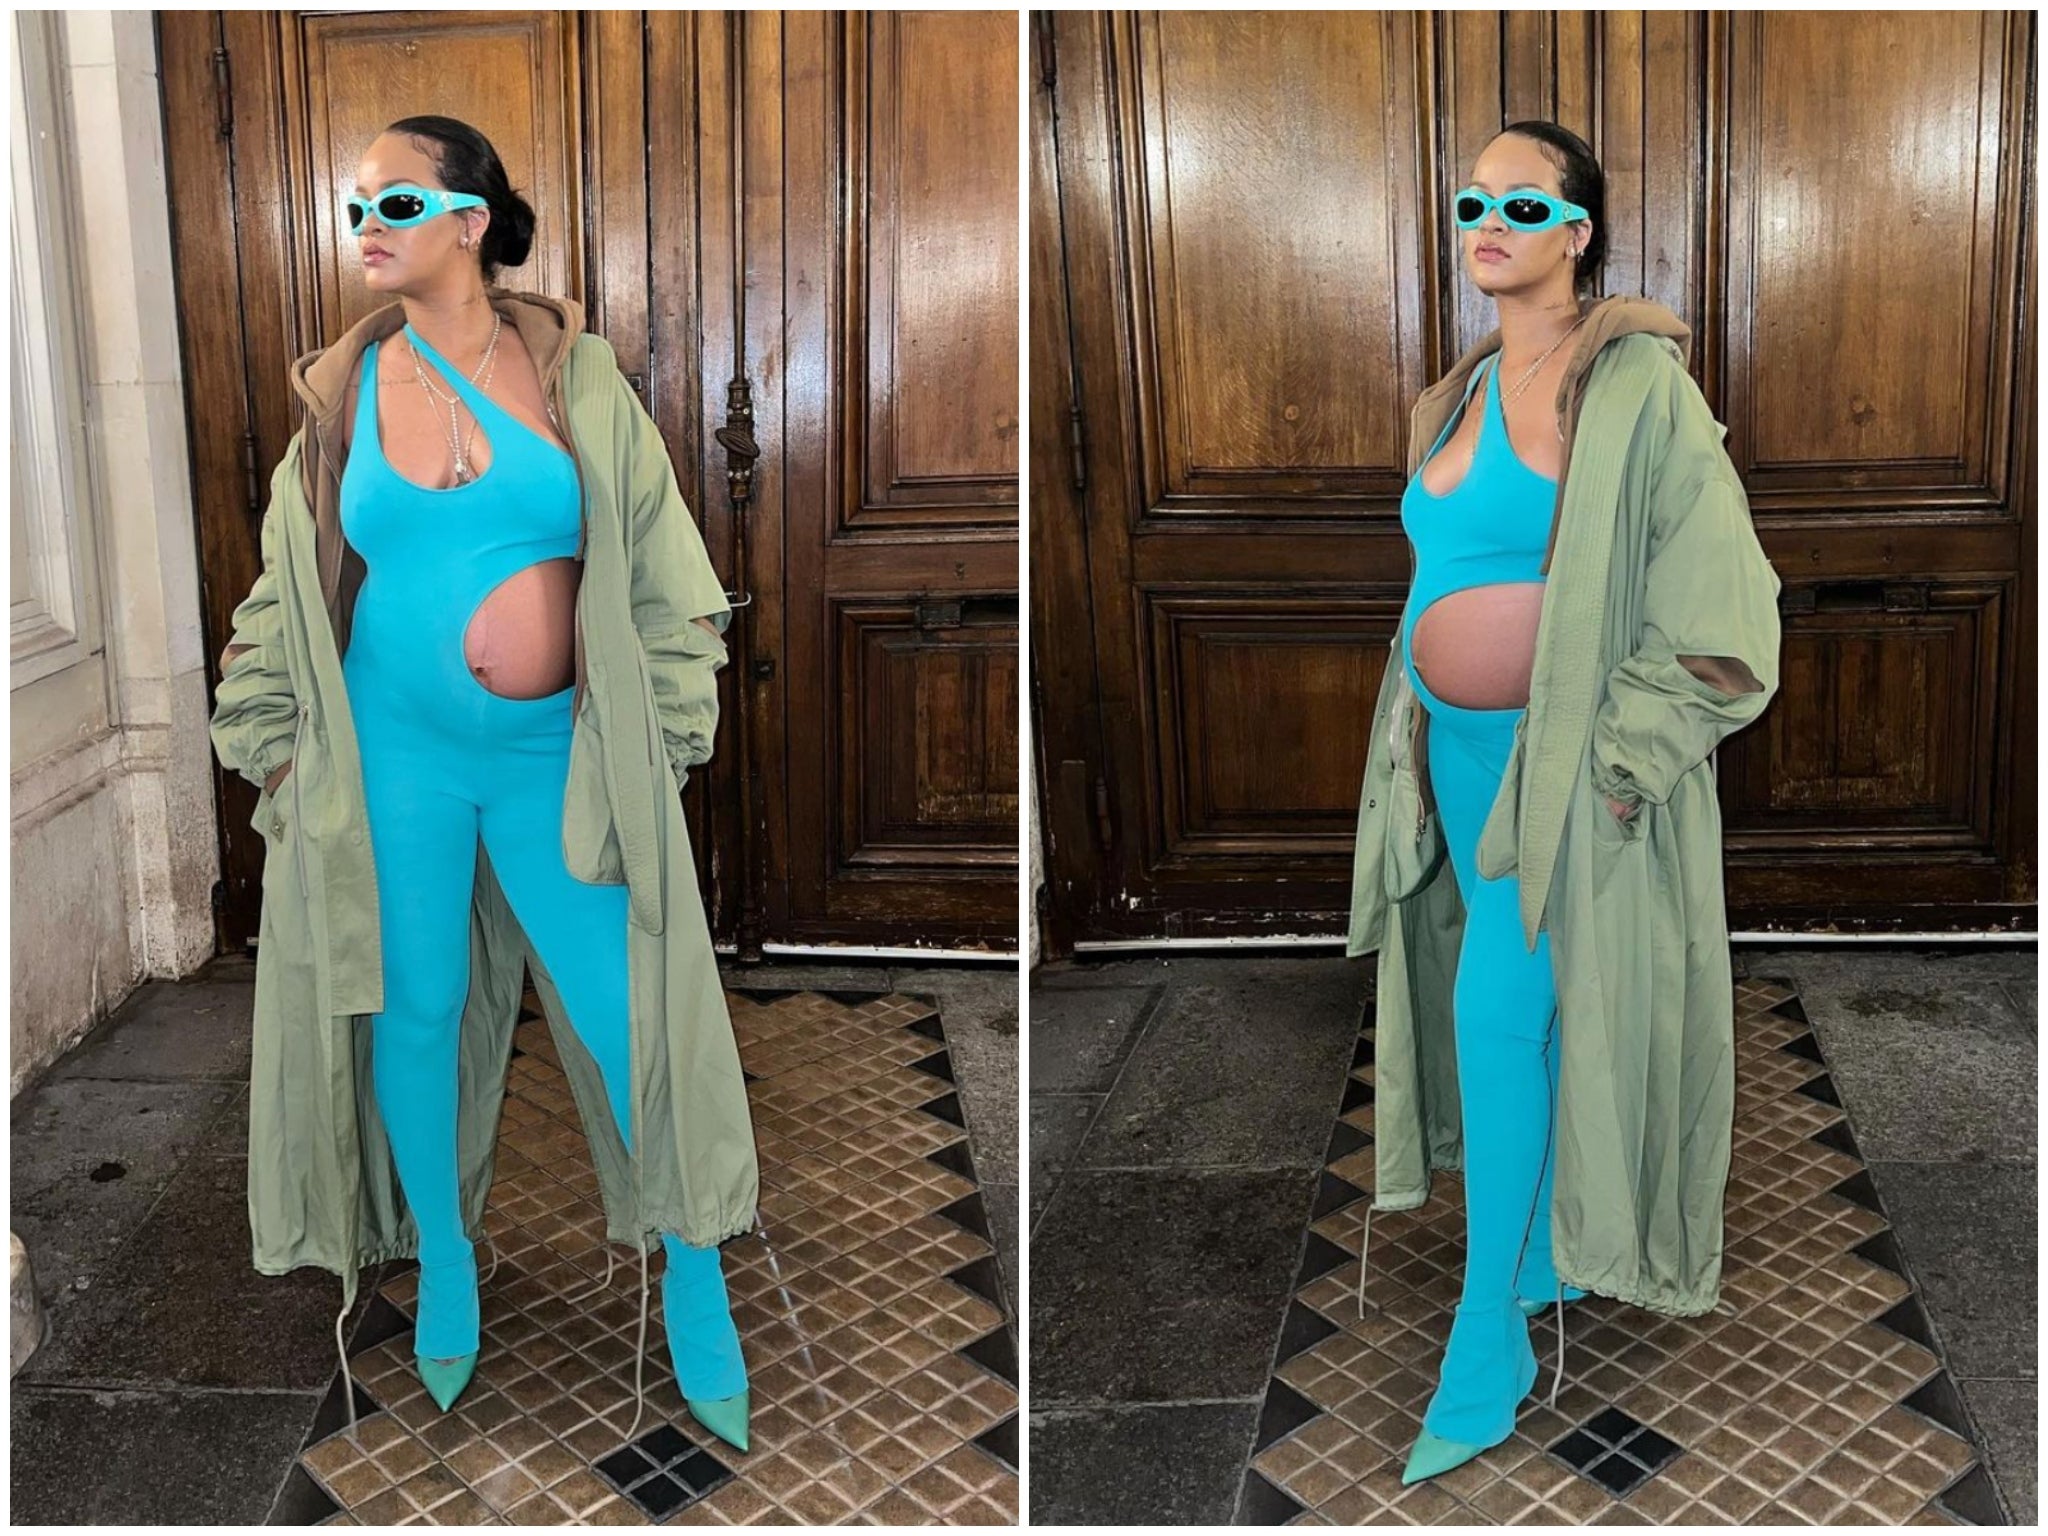 Rihanna pregnant is a fashion moment: Her baby bump maternity style